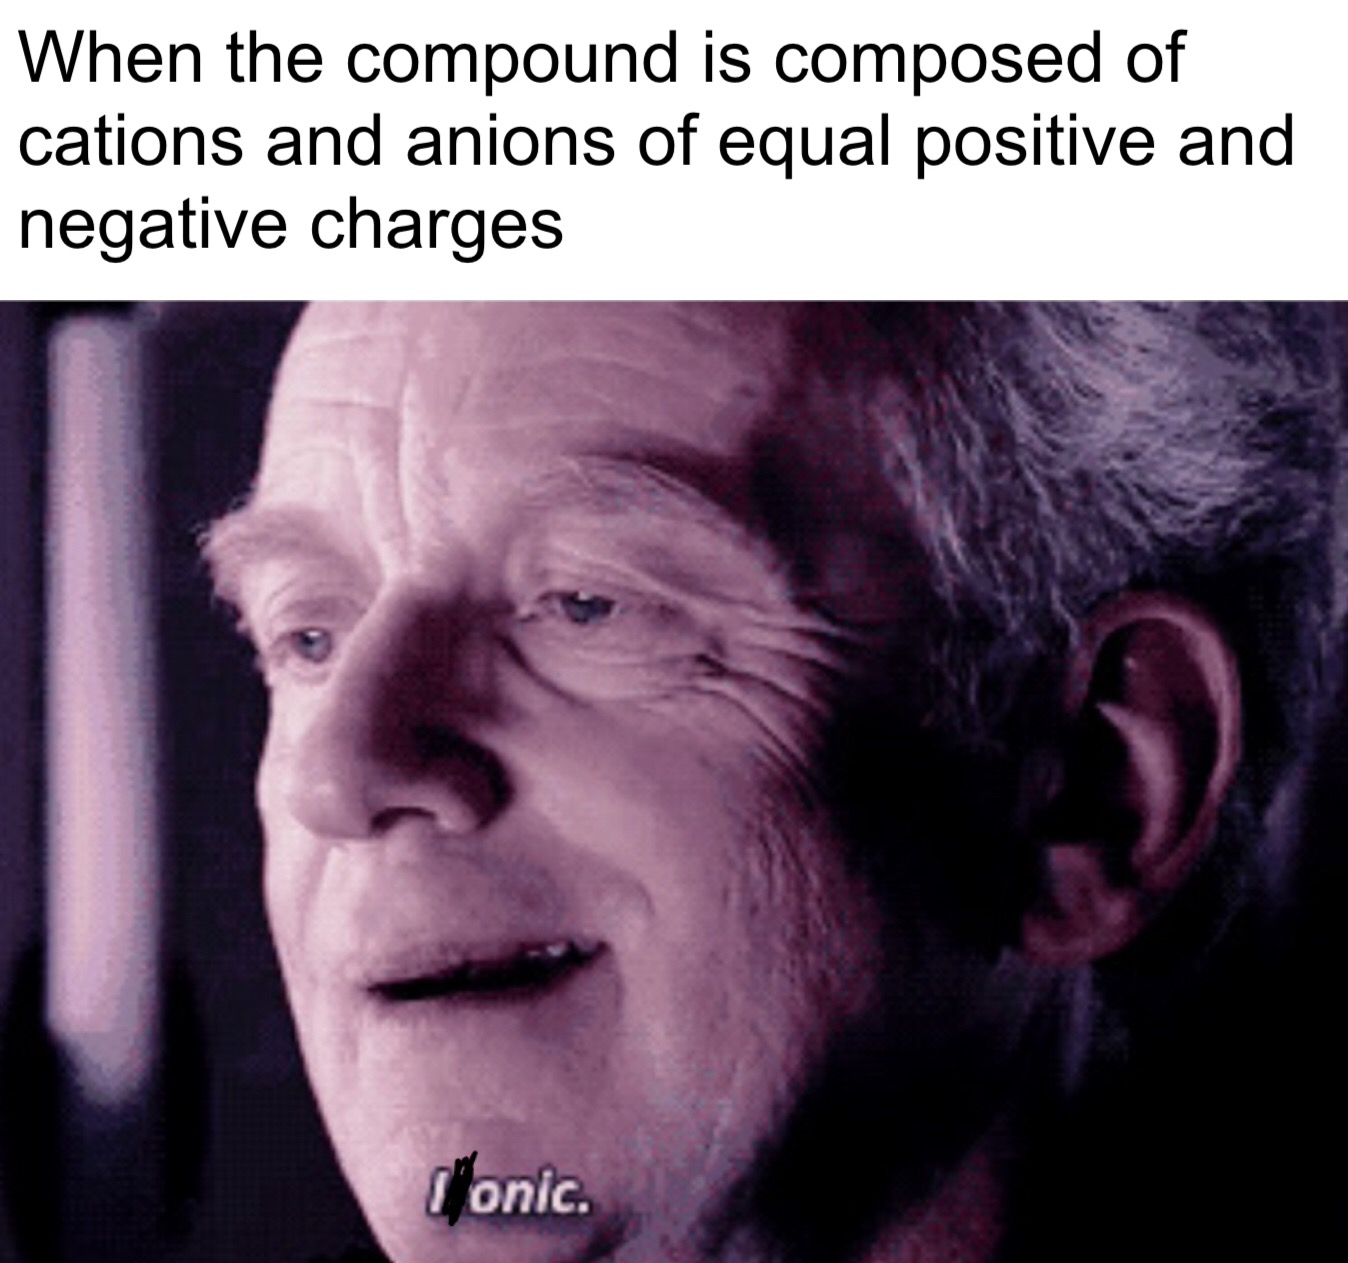 chemistry memes - When the compound is composed of cations and anions of equal positive and negative charges Ionic.